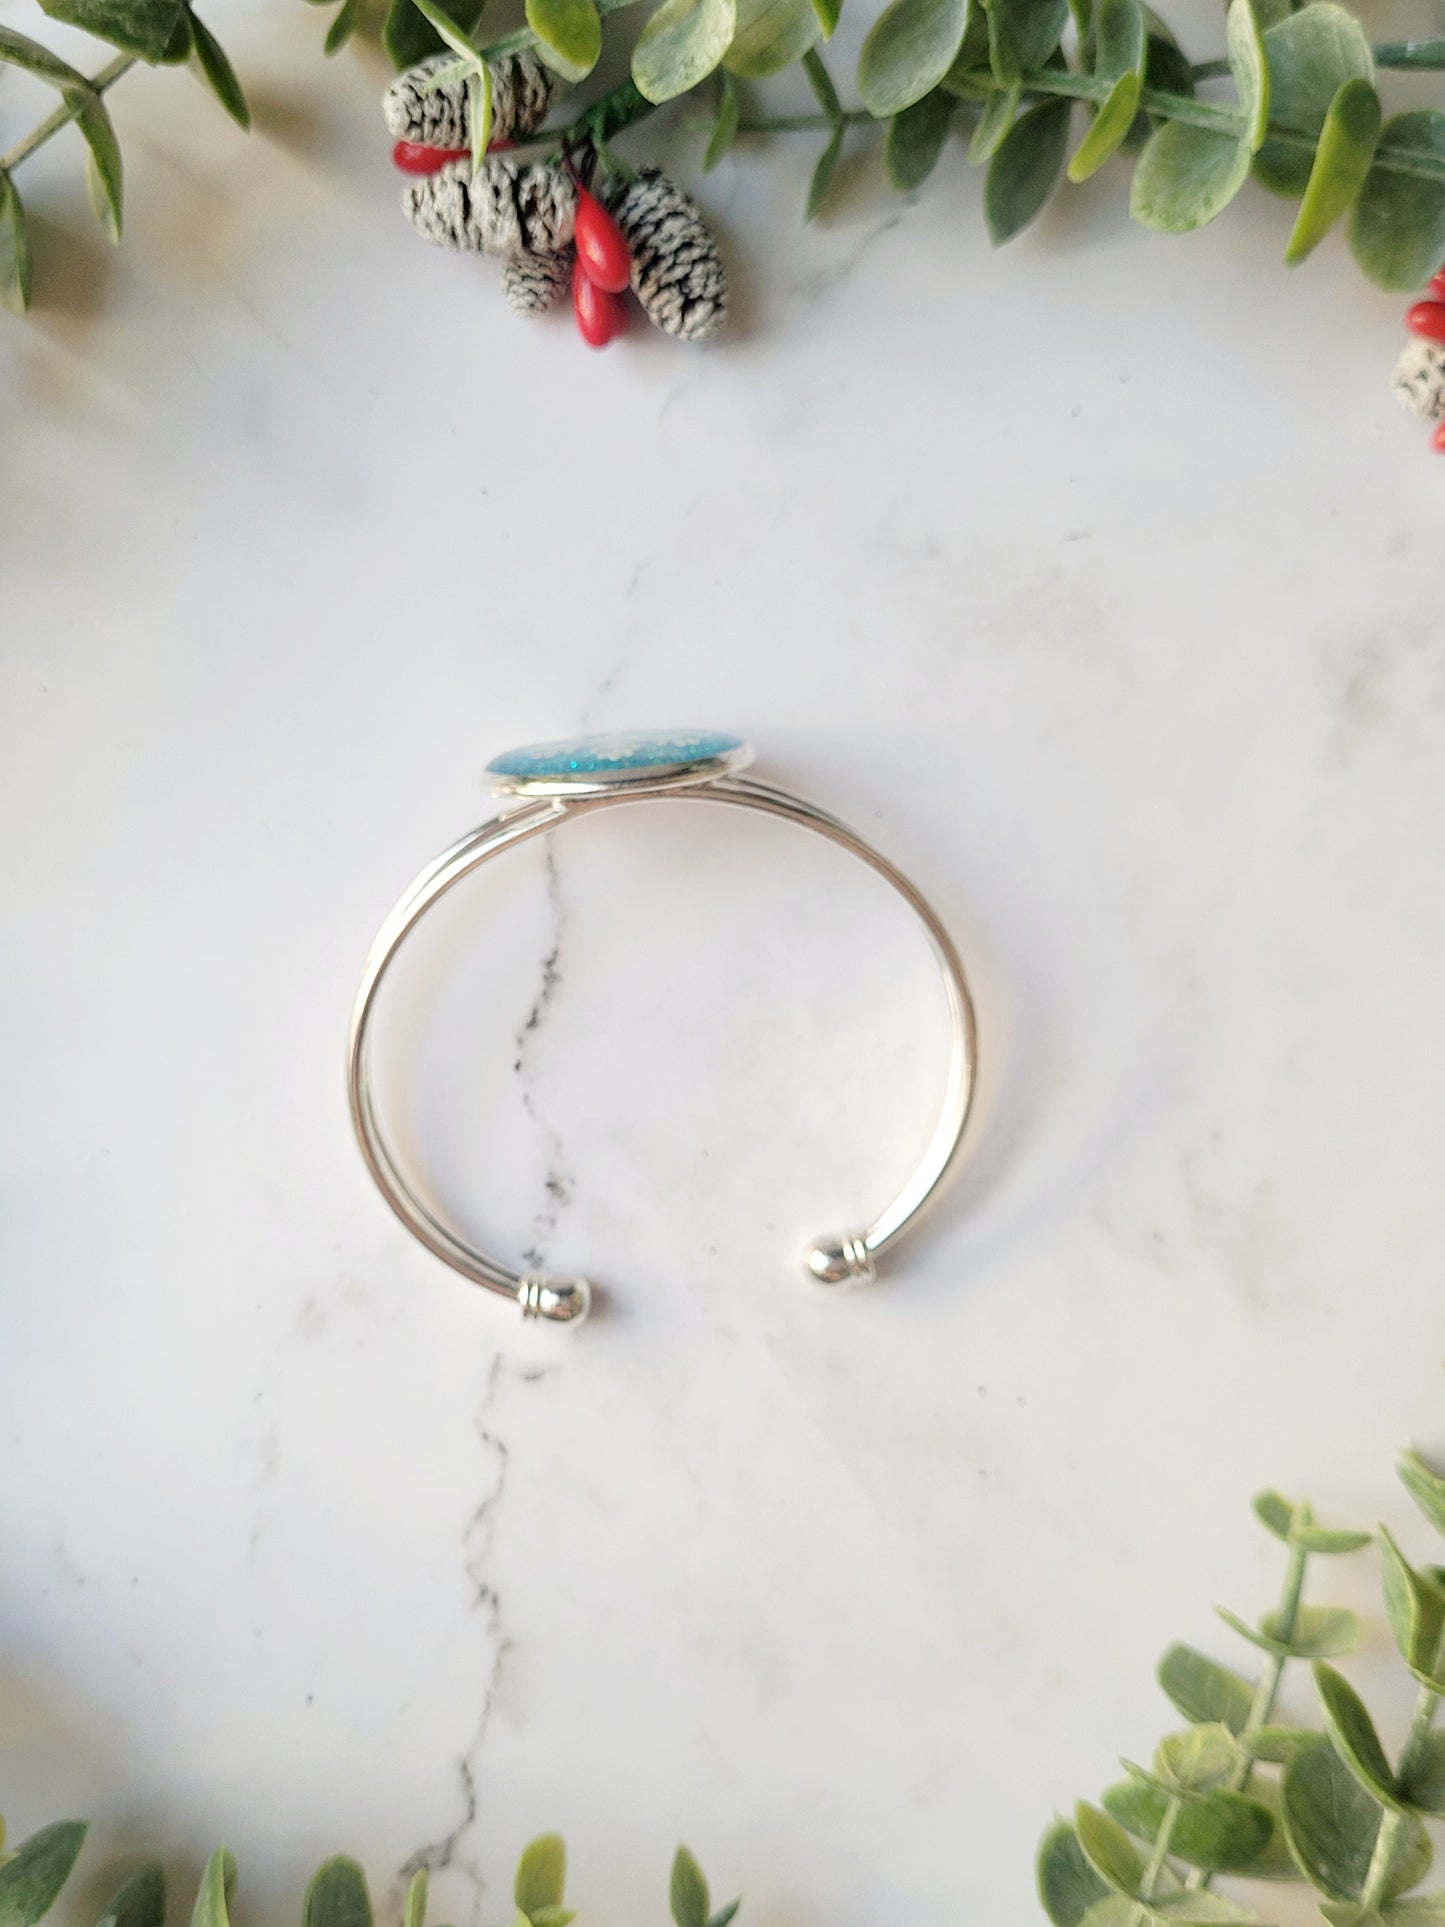 side view of silver braceclet with a blue glitter charm and a white snowflake on white marble background with foliage.